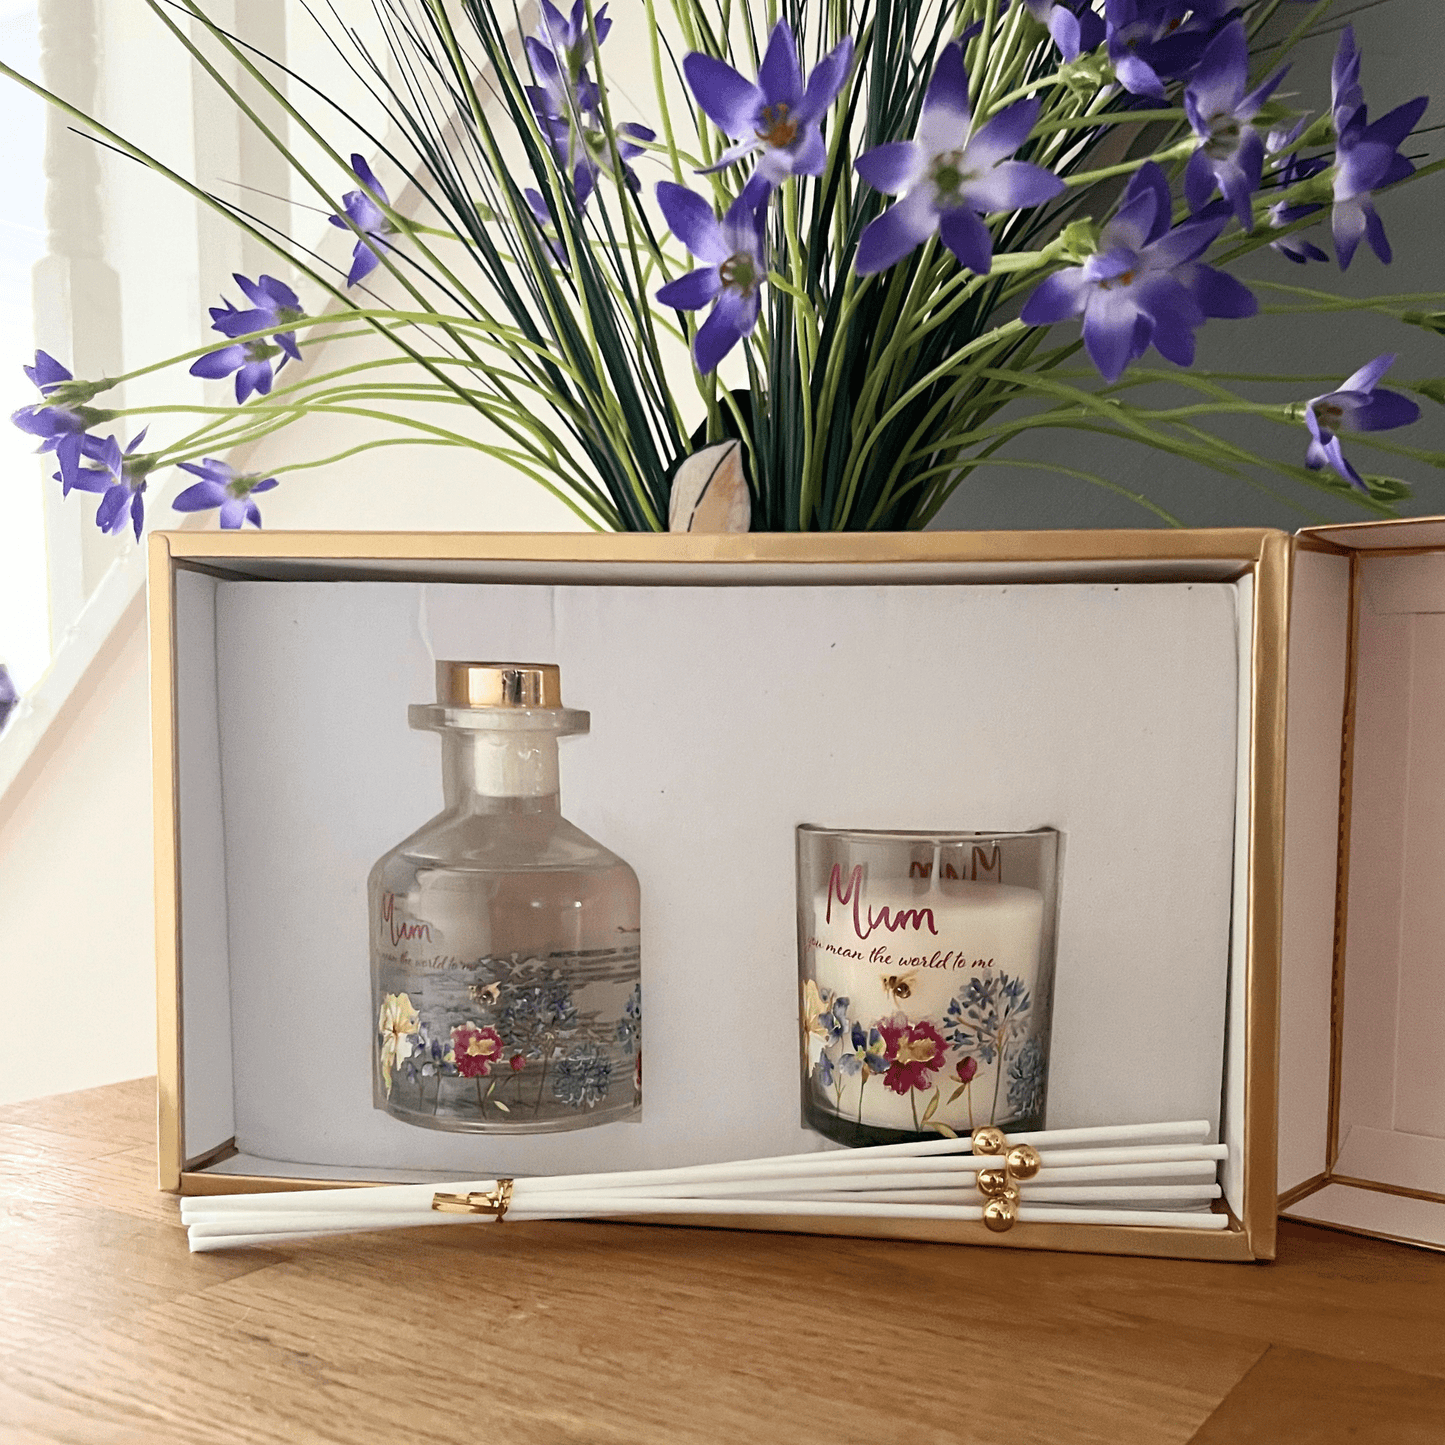 Mum Diffuser and Candle Set - Peppy & Sage